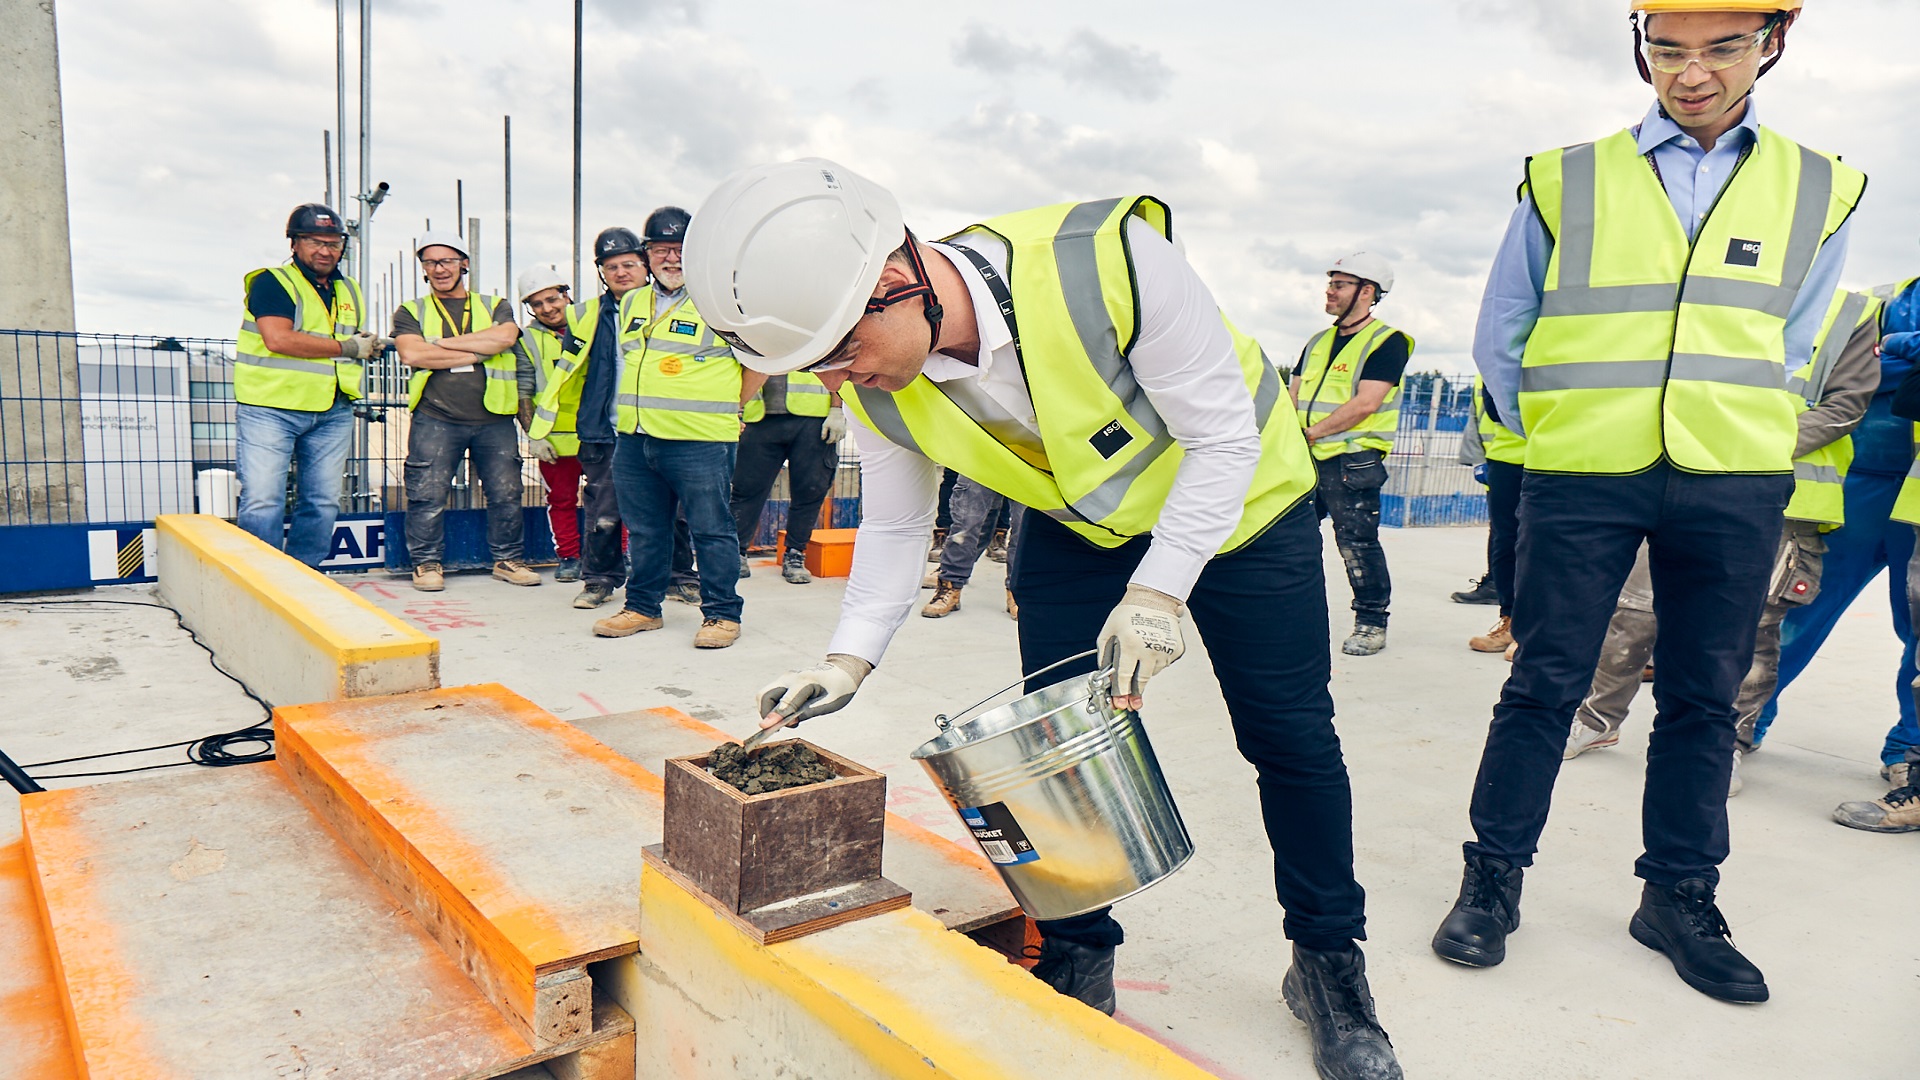 OCC topping out brick laying